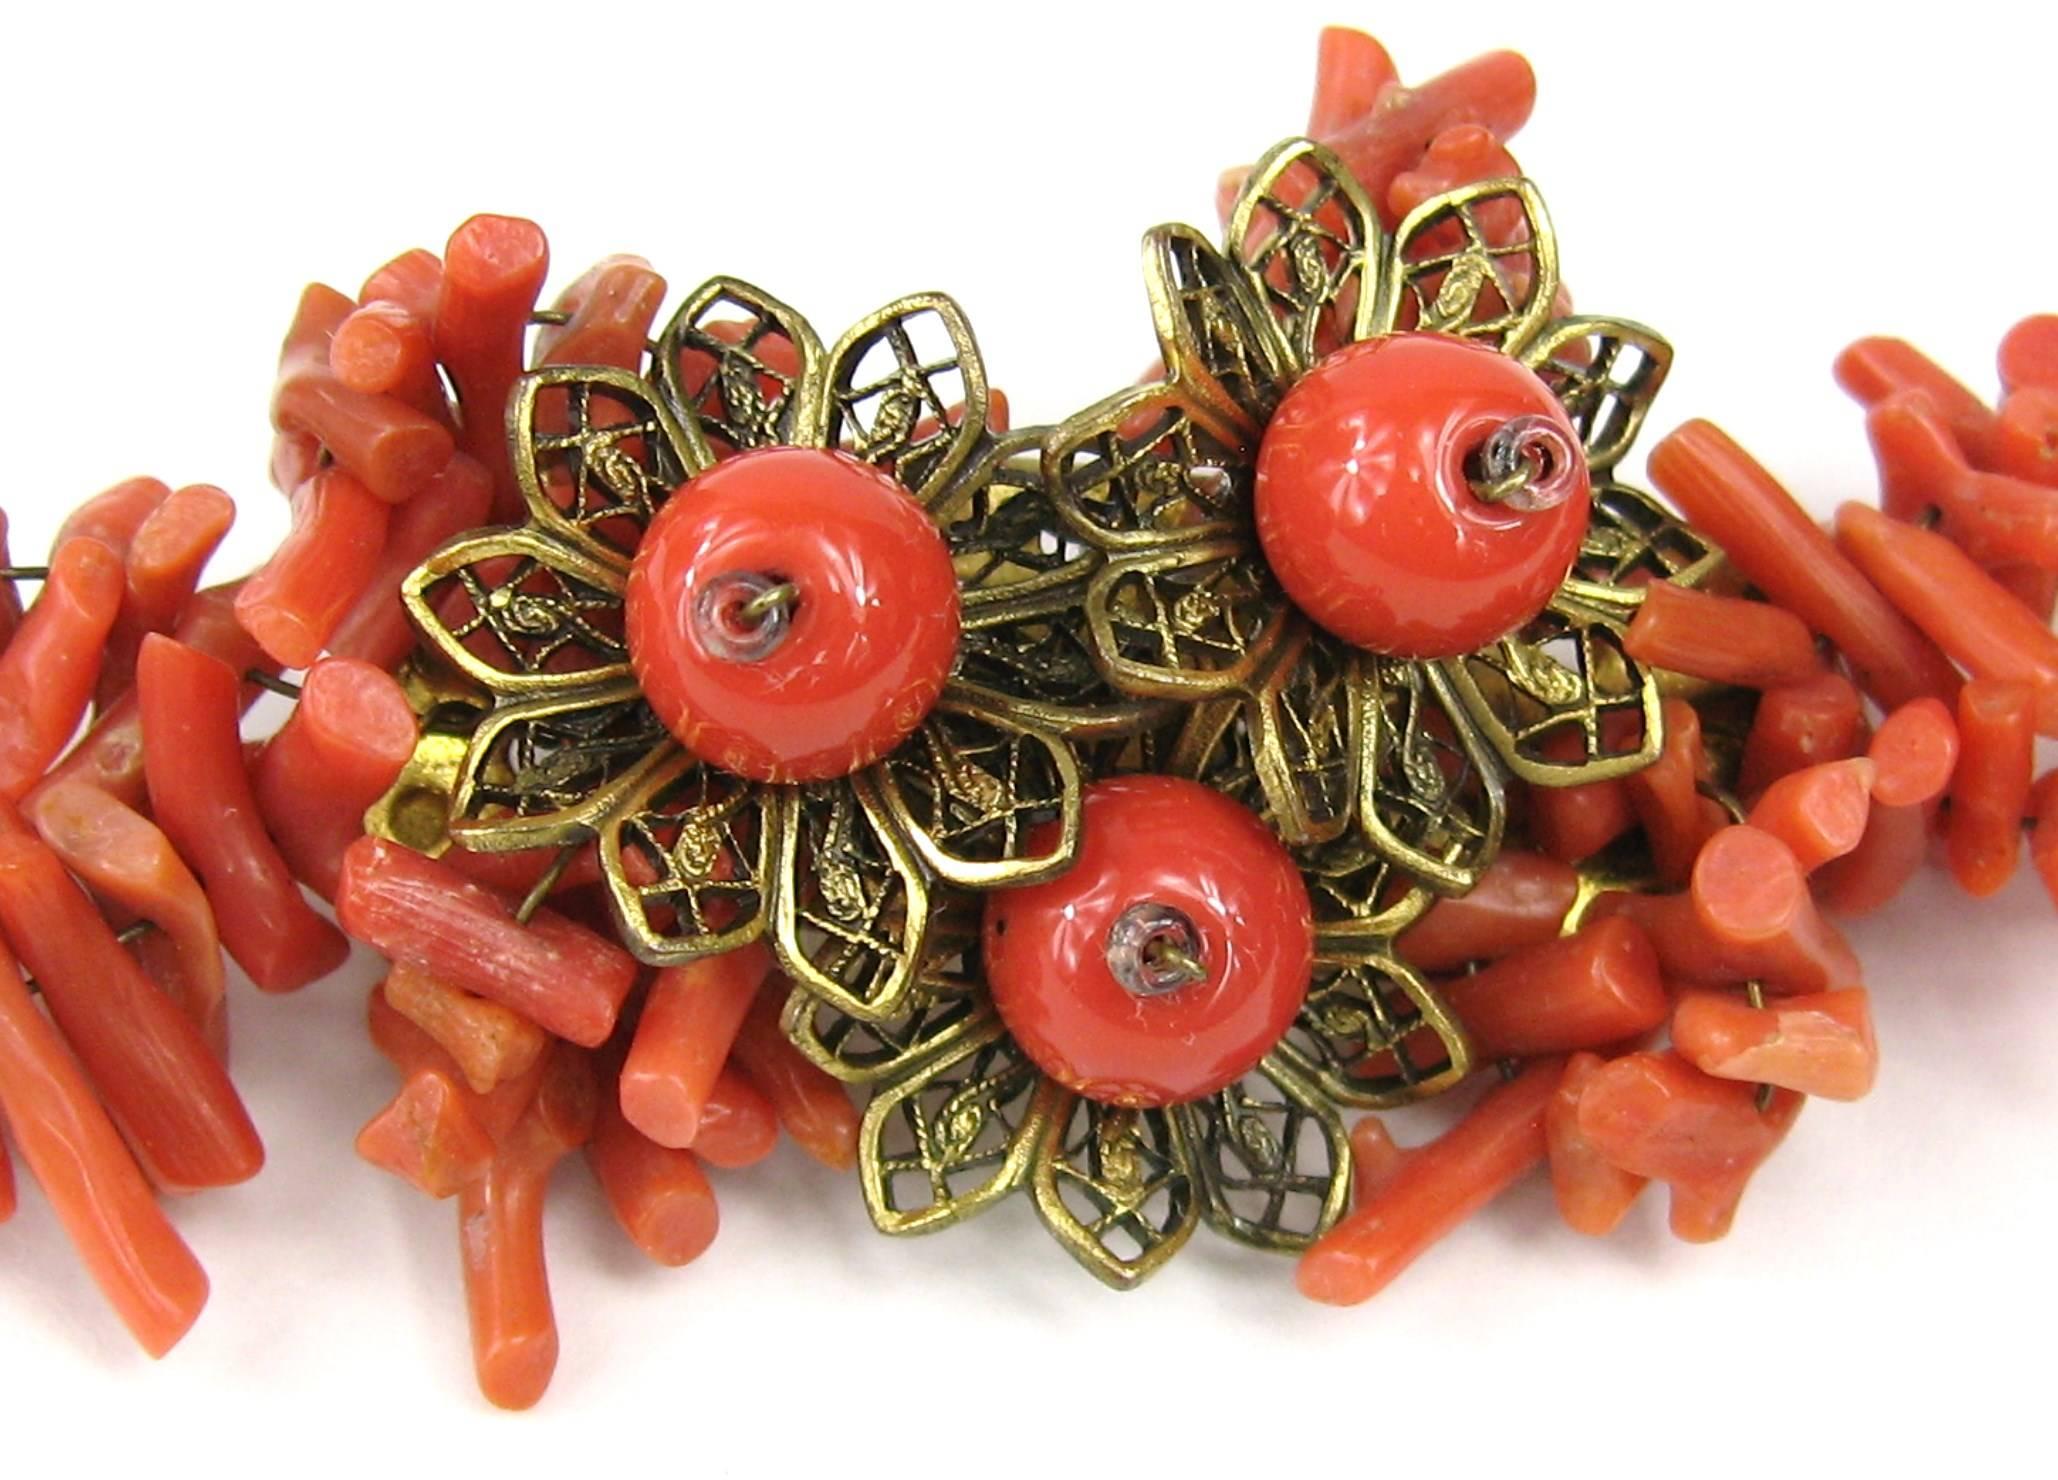 Classic Haskell Stunning! designed by Frank Hess. This brooch features dozens of branch coral beads meticulously hand wired onto a brass frame, and topped with three filigree flowers. This brooch is confirmed to be an early Haskell designed by Frank